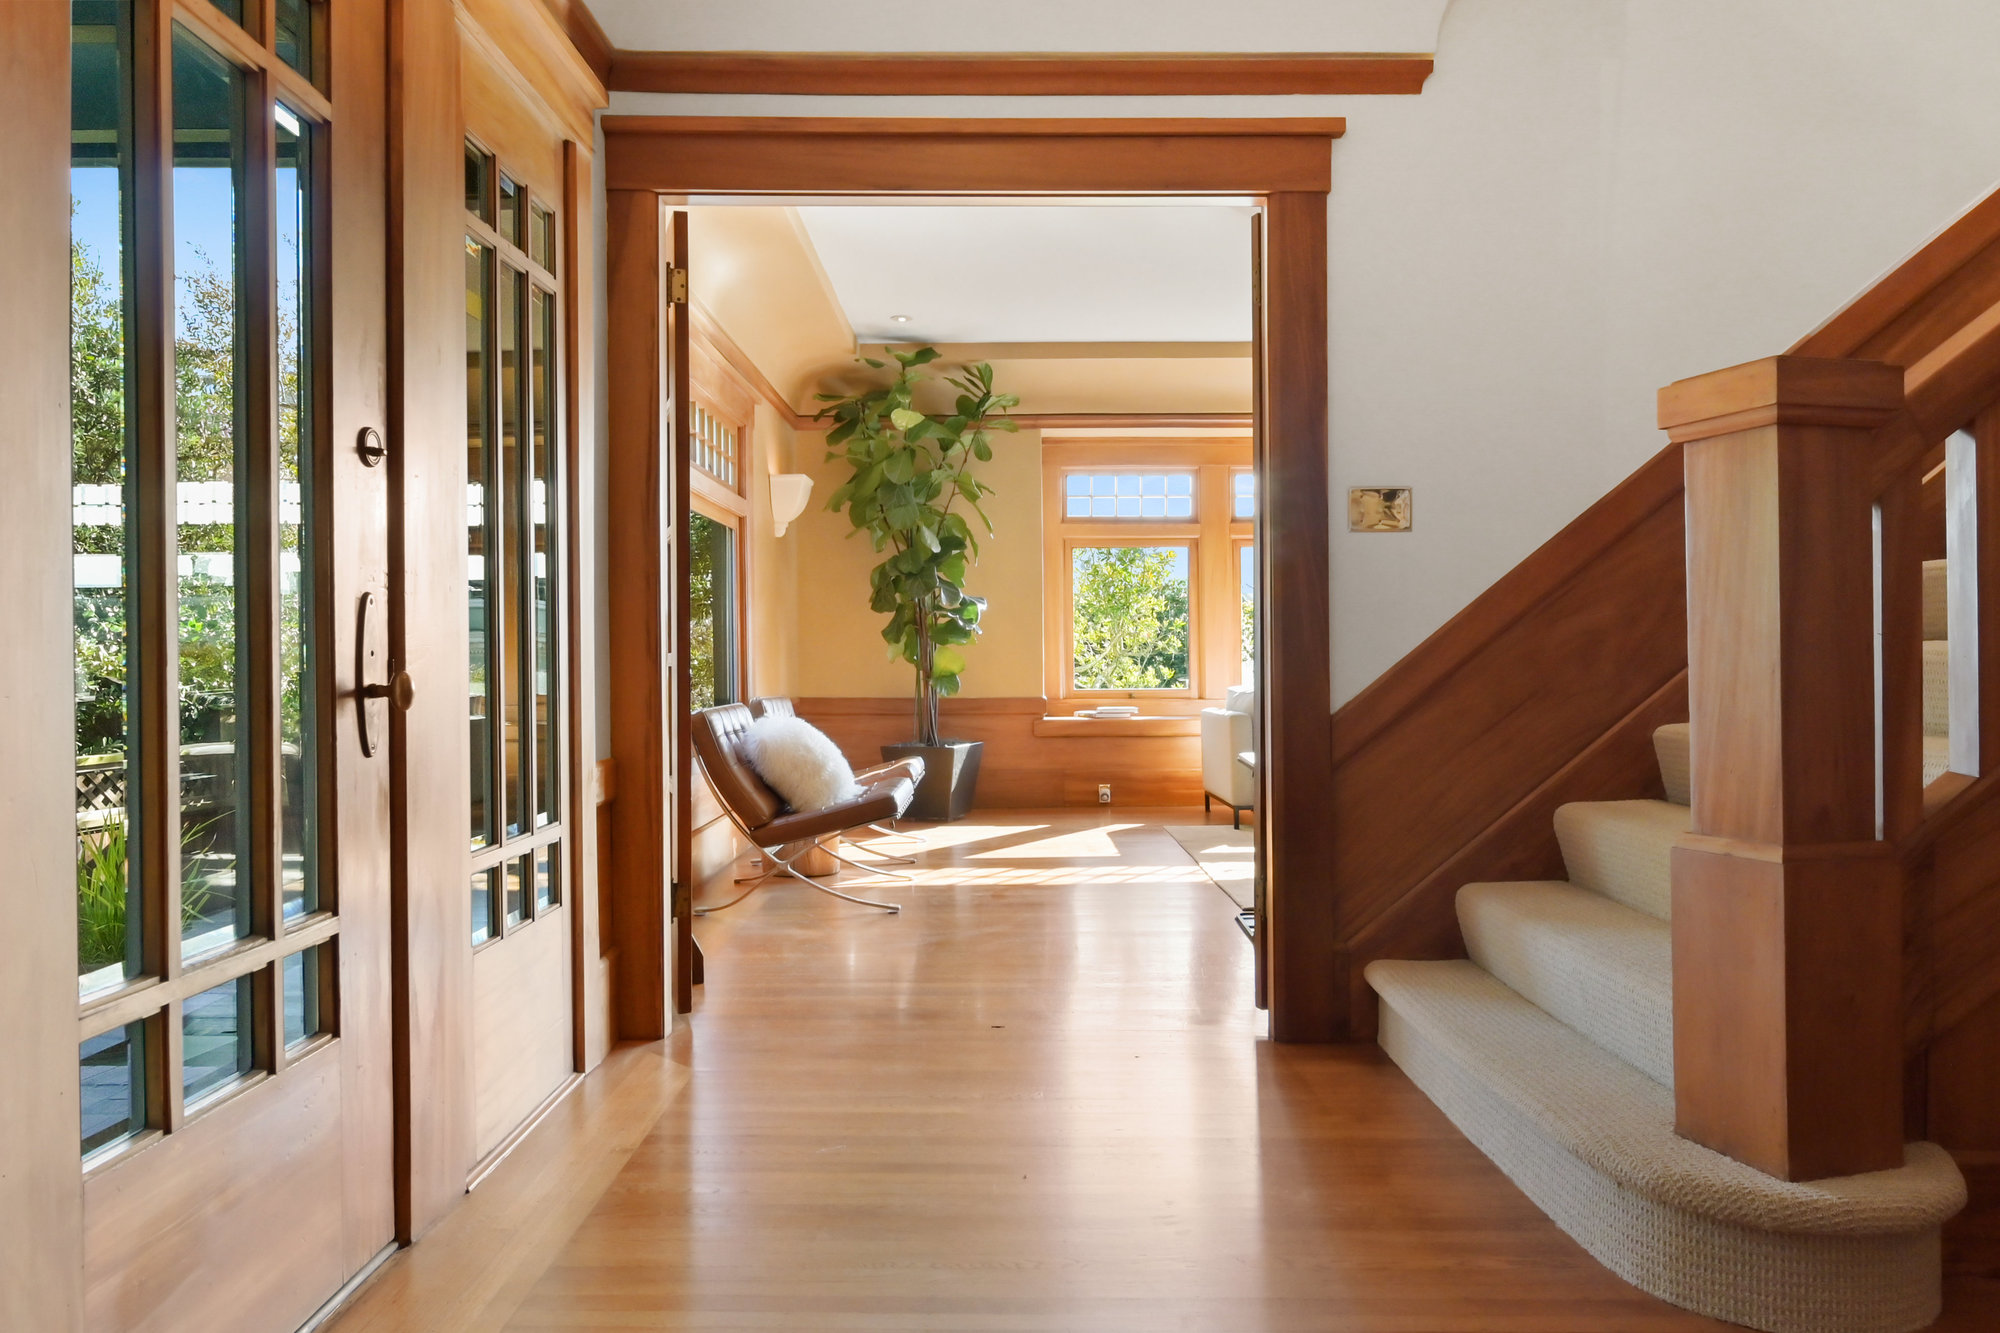 Property Photo: View of the hall showing light cascading in a window across beautiful wood floors